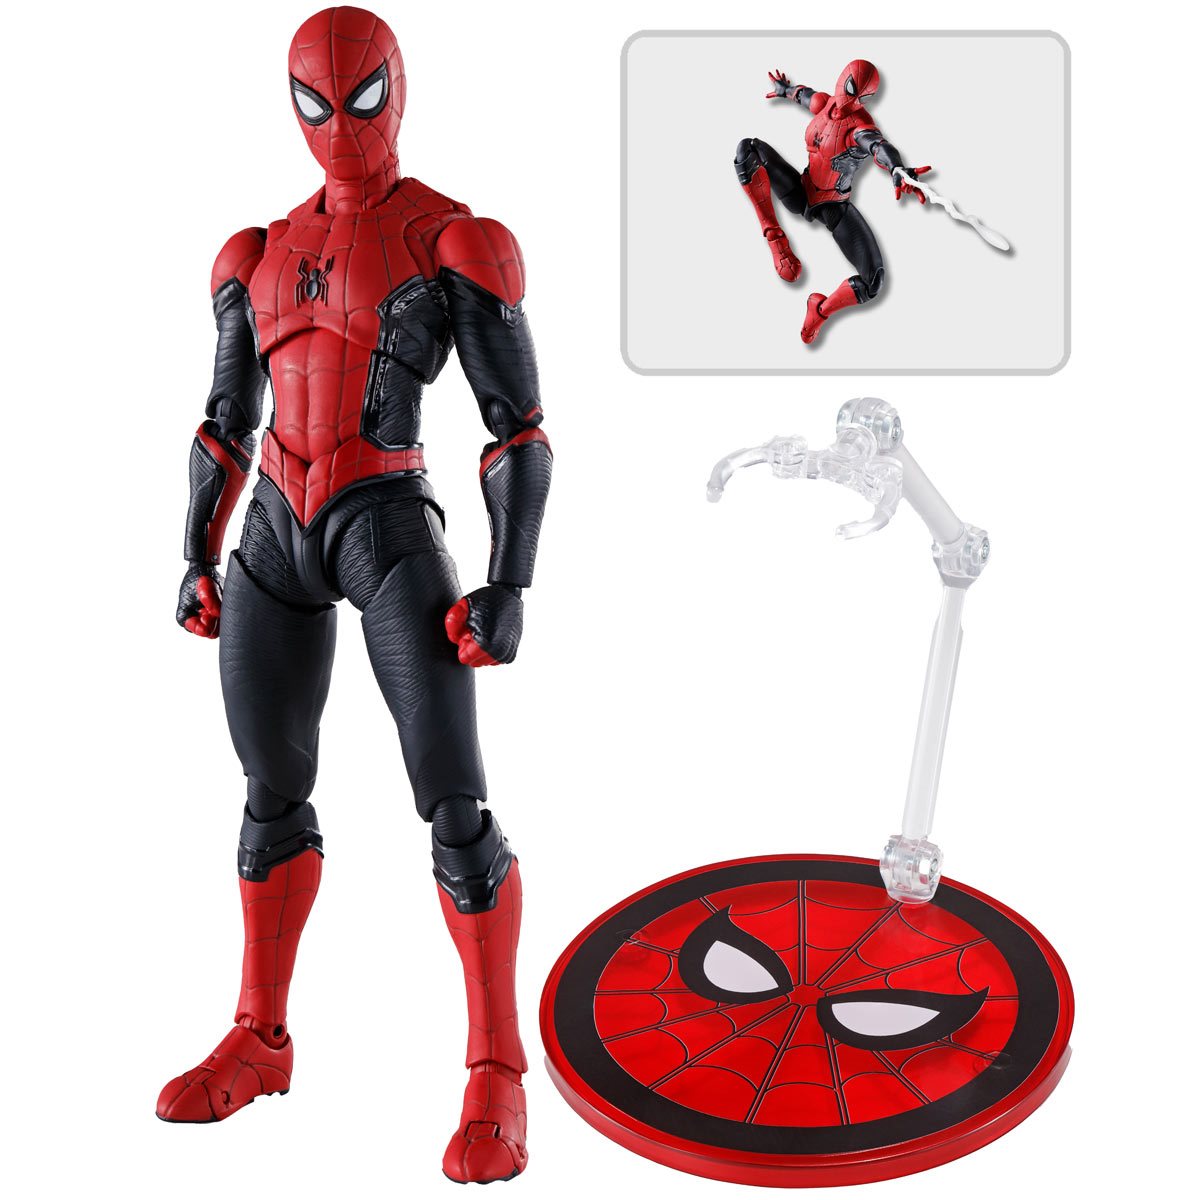 IN STOCK Bandai S.H.Figuarts Spider-Man UUpgrade Suit  Far From Home SHF Figure 